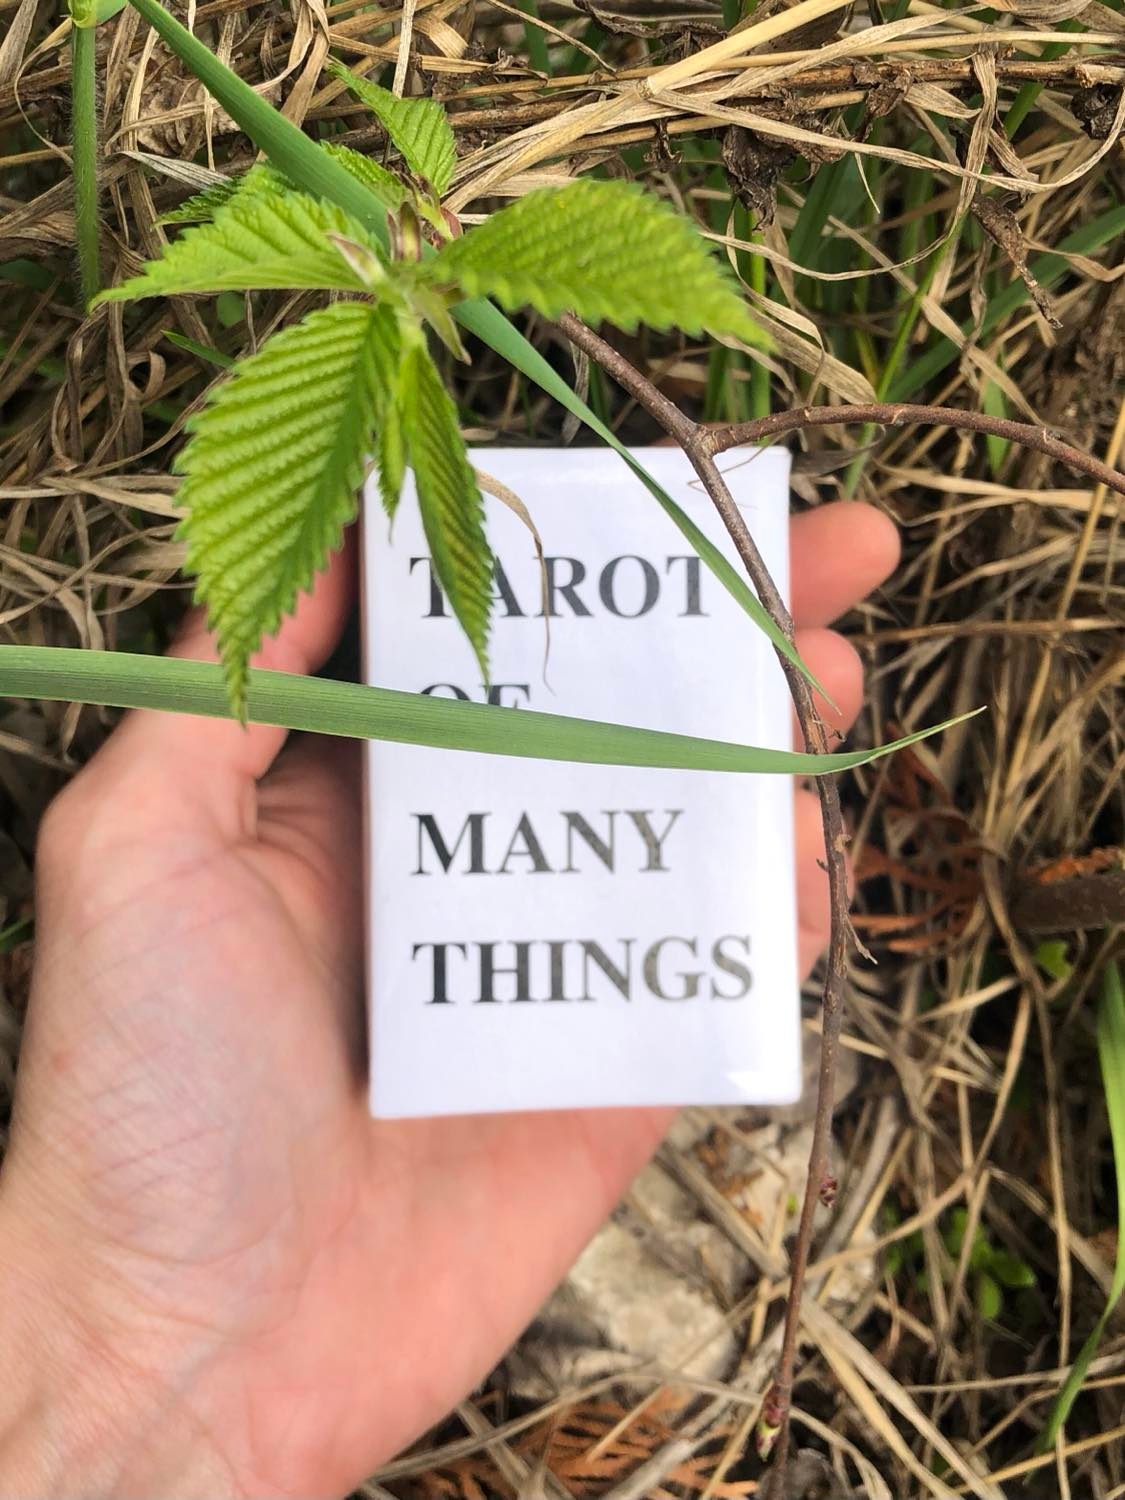 Found in the grasses, the tarot of many things. A plain white box with sharp lettering. You hold it aloft in the grass, barely able to believe what you're seeing.